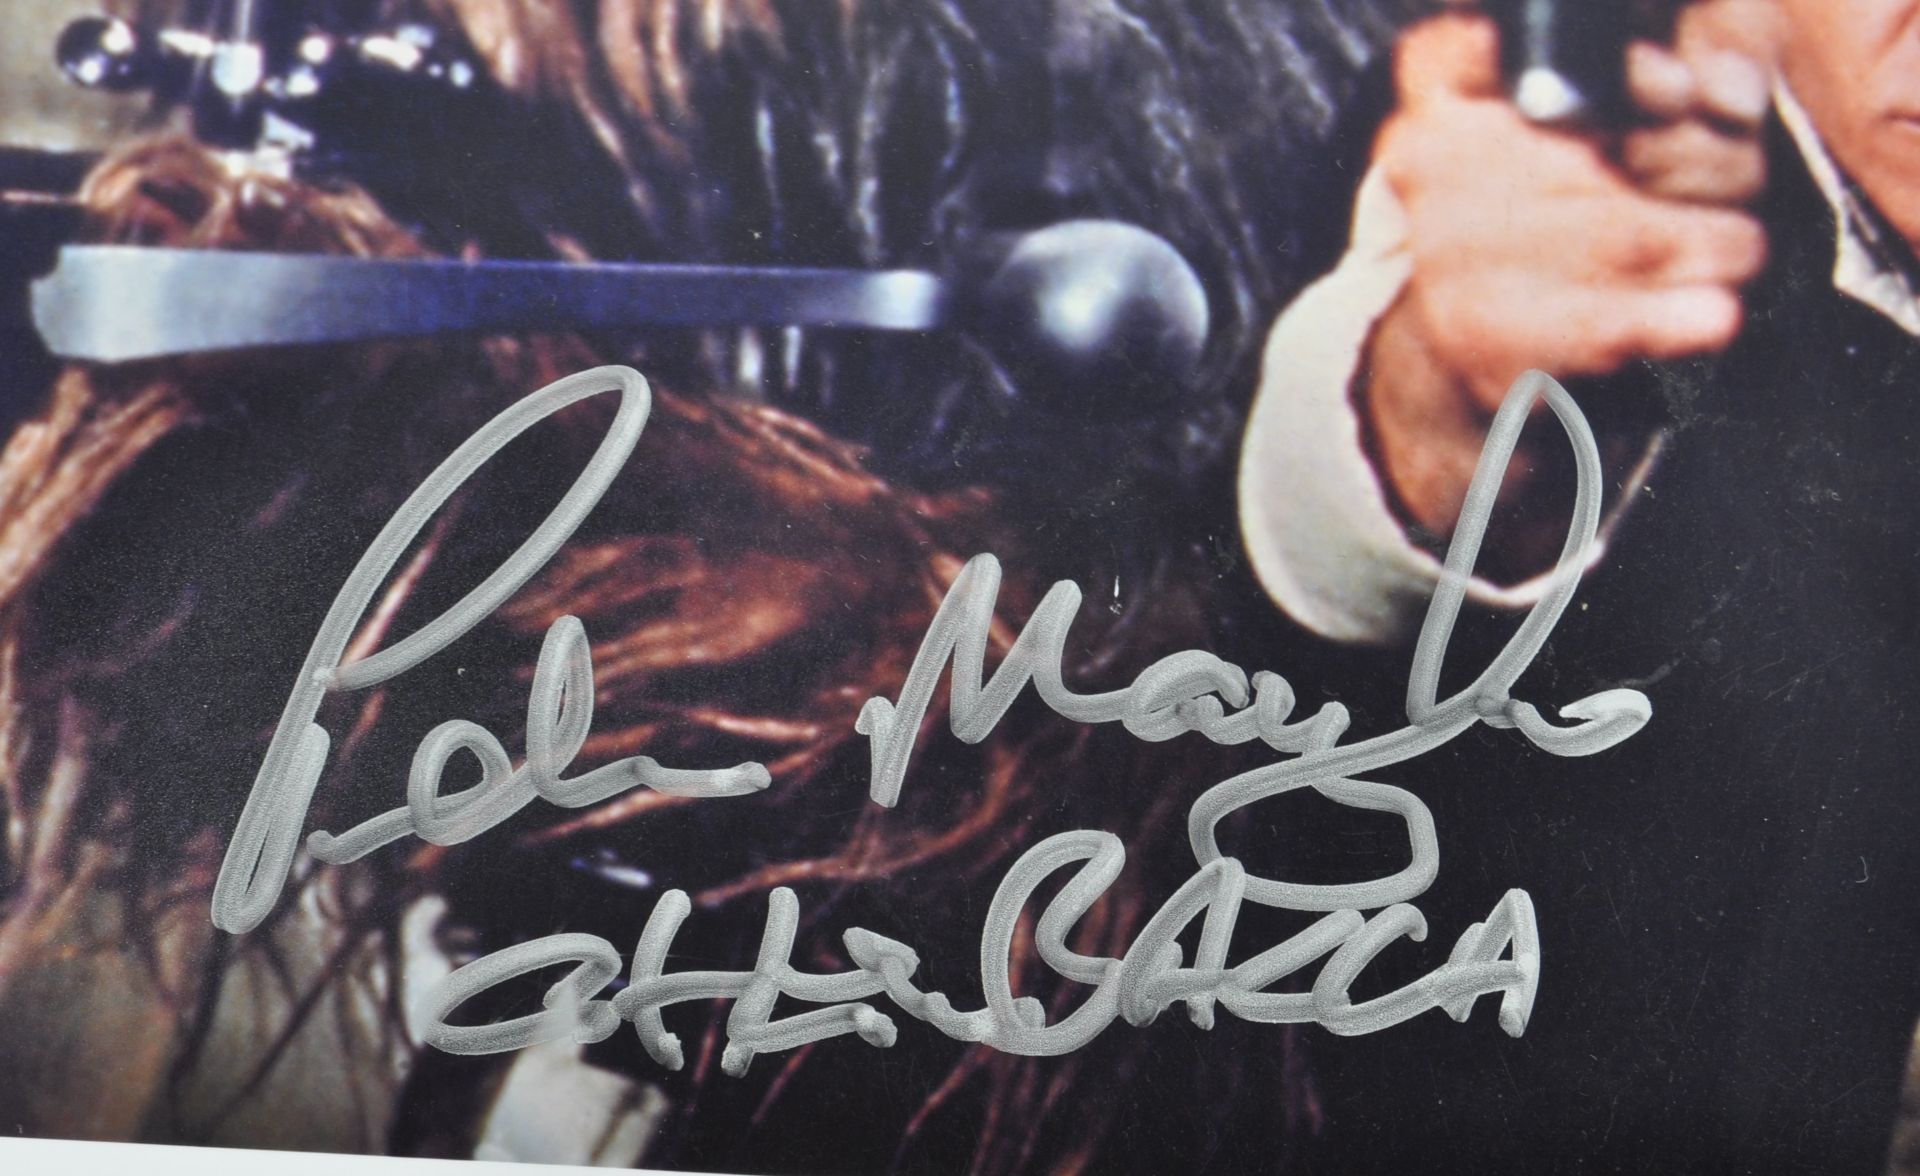 FROM THE COLLECTION OF DAVE PROWSE - STAR WARS SIGNED PHOTO - Image 2 of 4